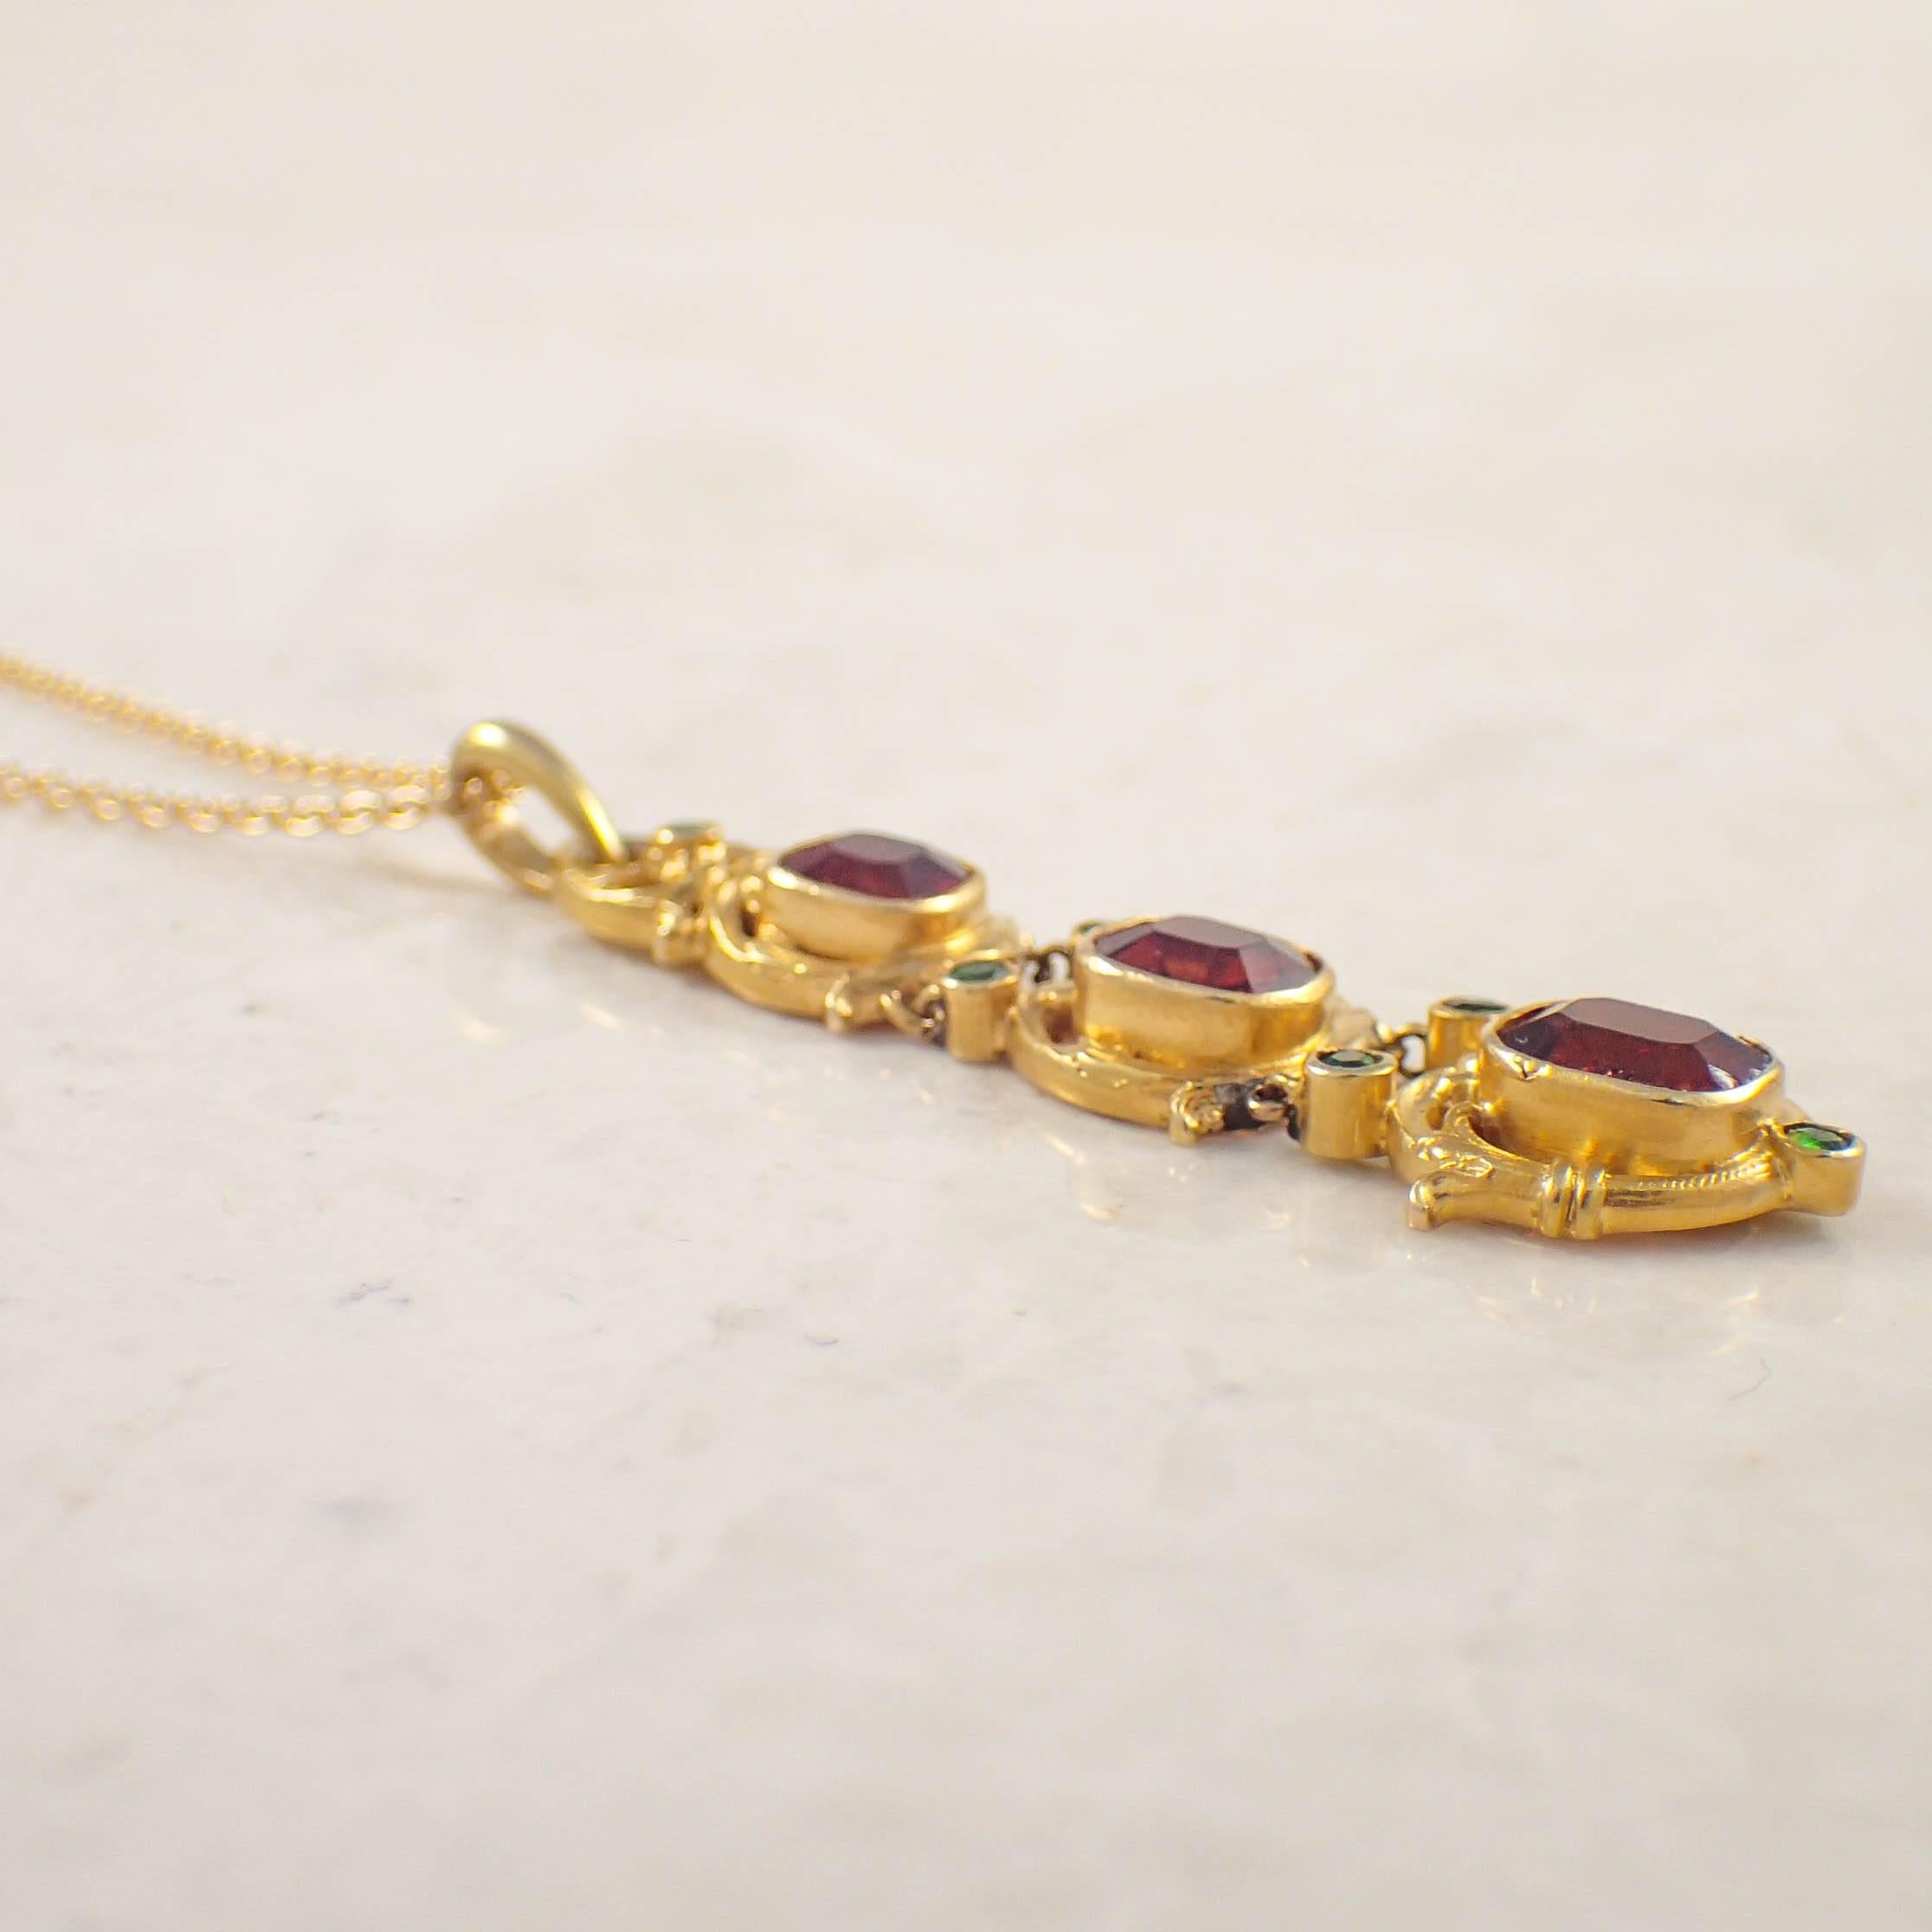 Art Nouveau 14k yellow gold citrine and garnet pendant. The graduated carved links are centered with cushion shaped madeira citrines, accented by small round demantoid garnets. The 1.75 inch drop is suspended by a 16 inch cable chain. Gold weight